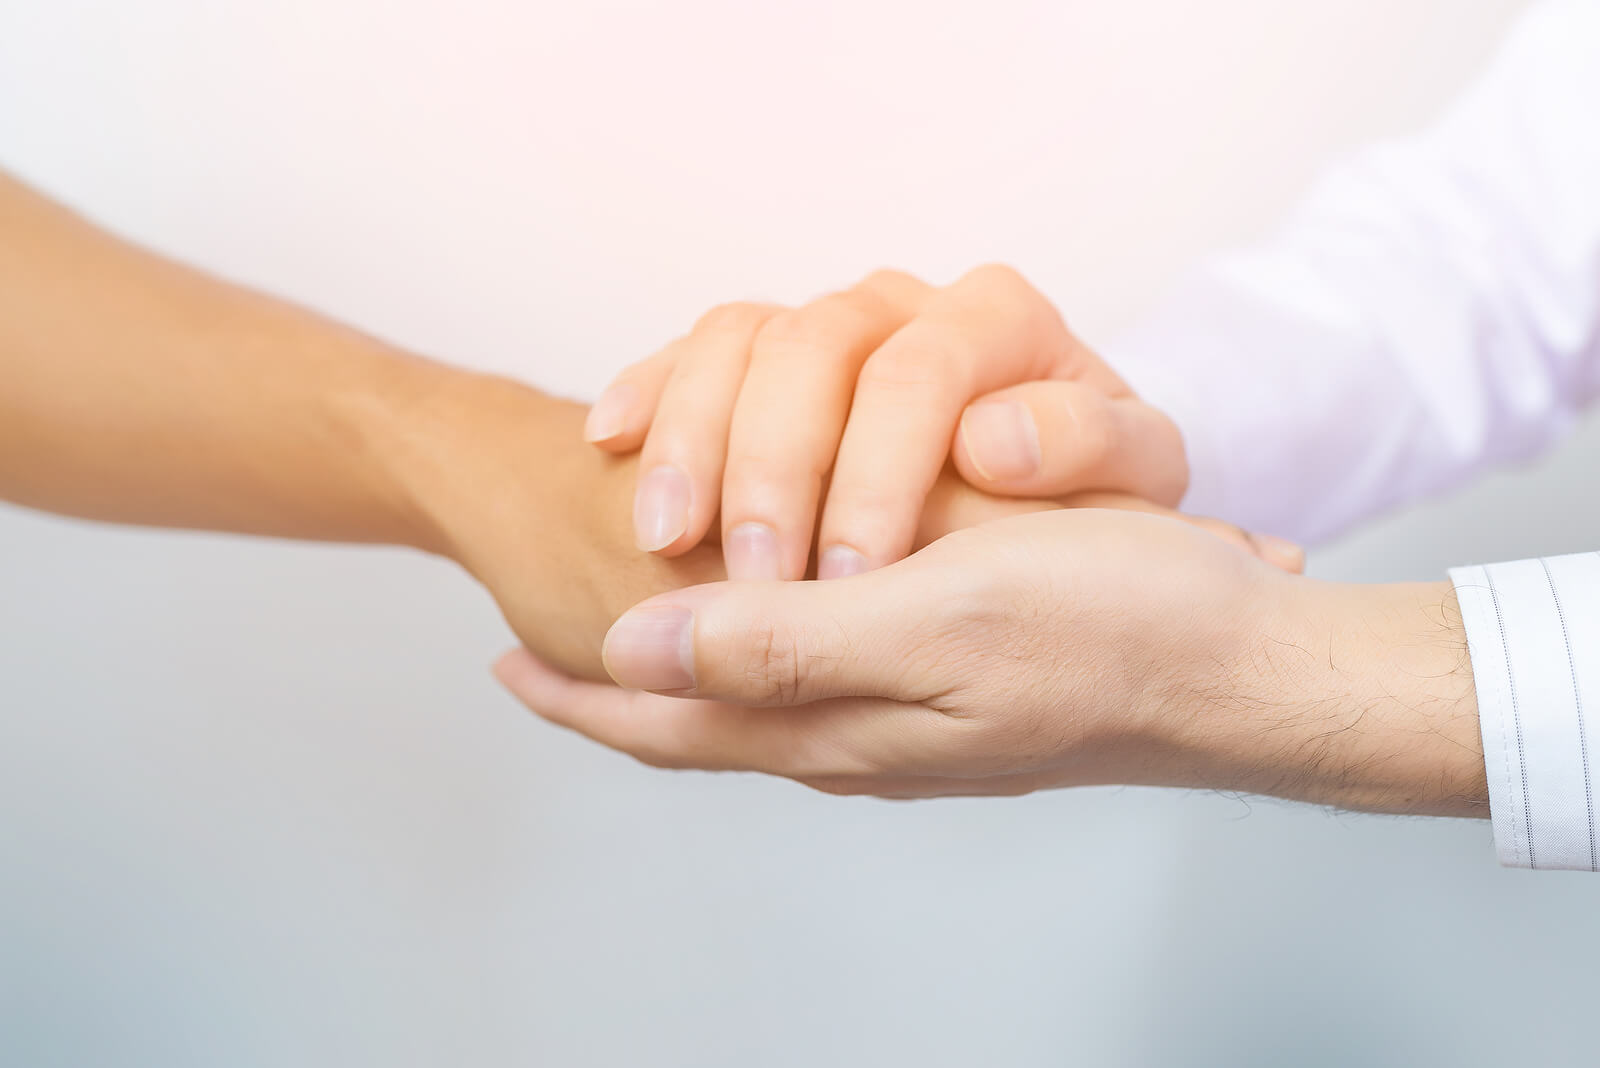 People holding hands supporting each other. PTSD treatment does not have to be scary. Our online PTSD therapist in Ohio is here to gently guide you through the process.